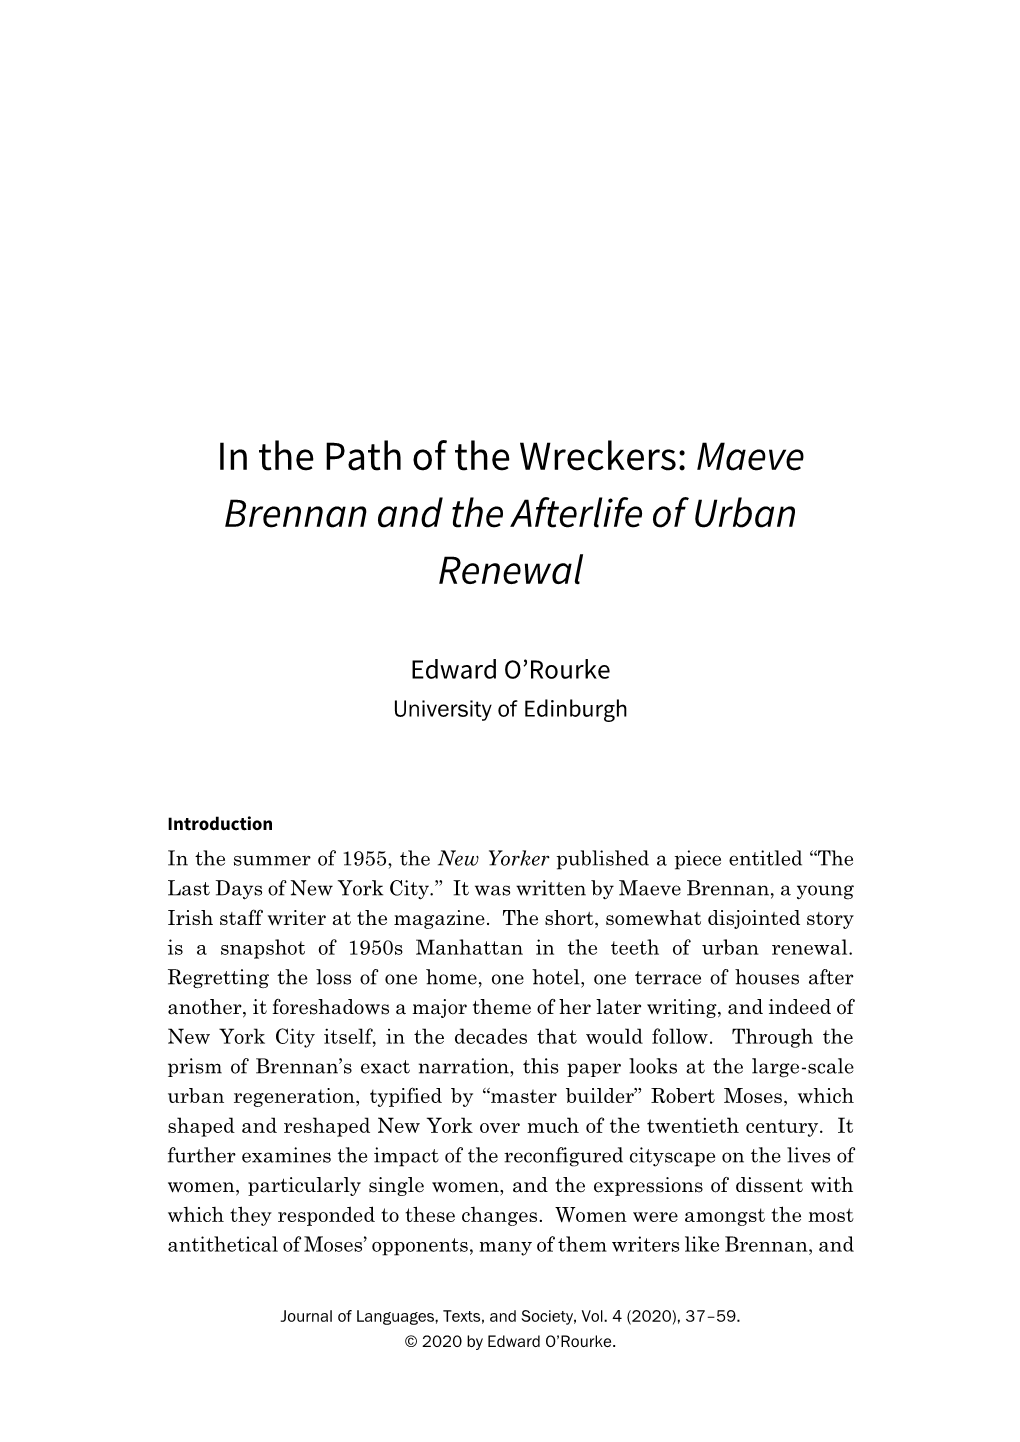 Maeve Brennan and the Afterlife of Urban Renewal